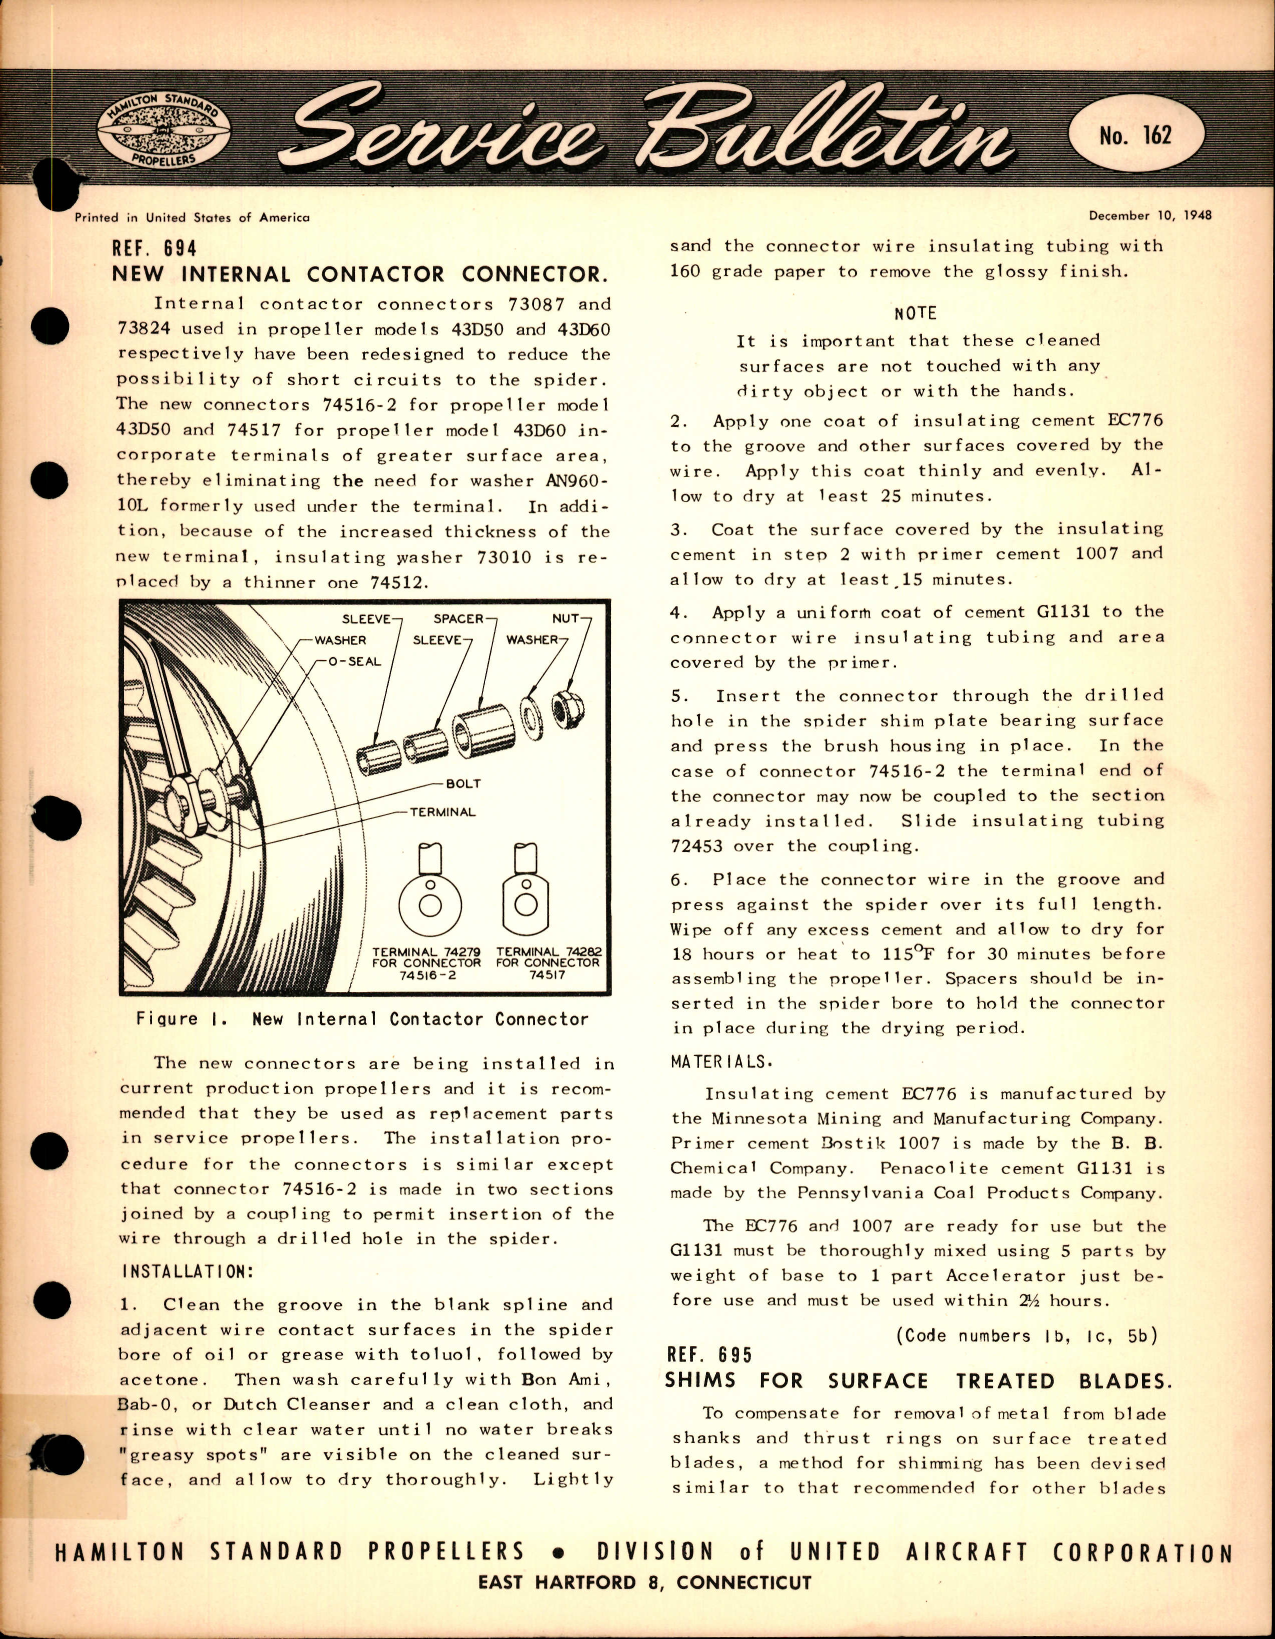 Sample page 1 from AirCorps Library document: New Internal Contactor Connector, Ref 694